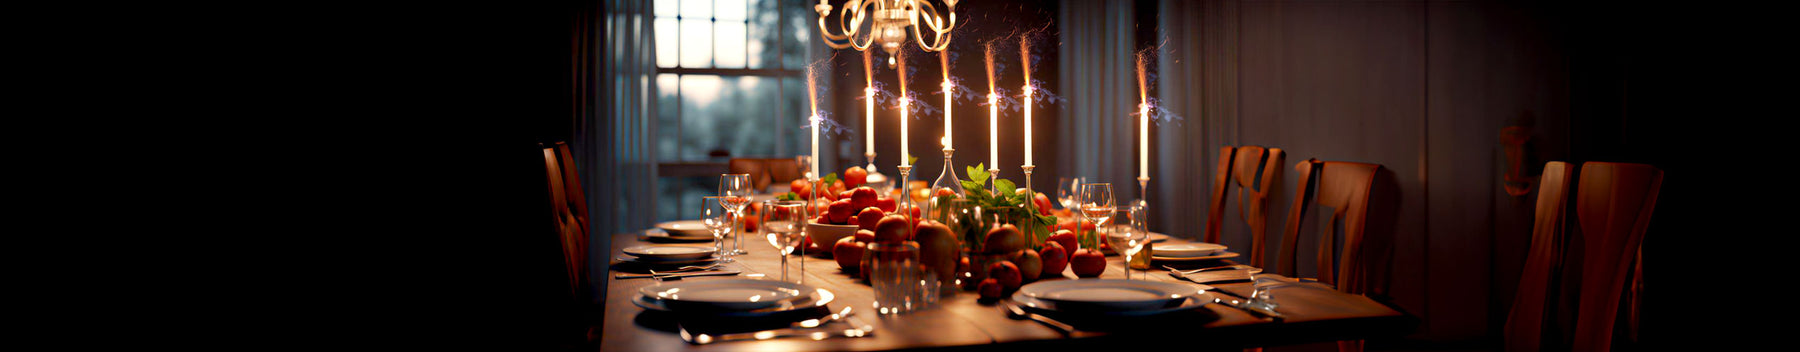 Firework Themed Products for Your Next Dinner Party